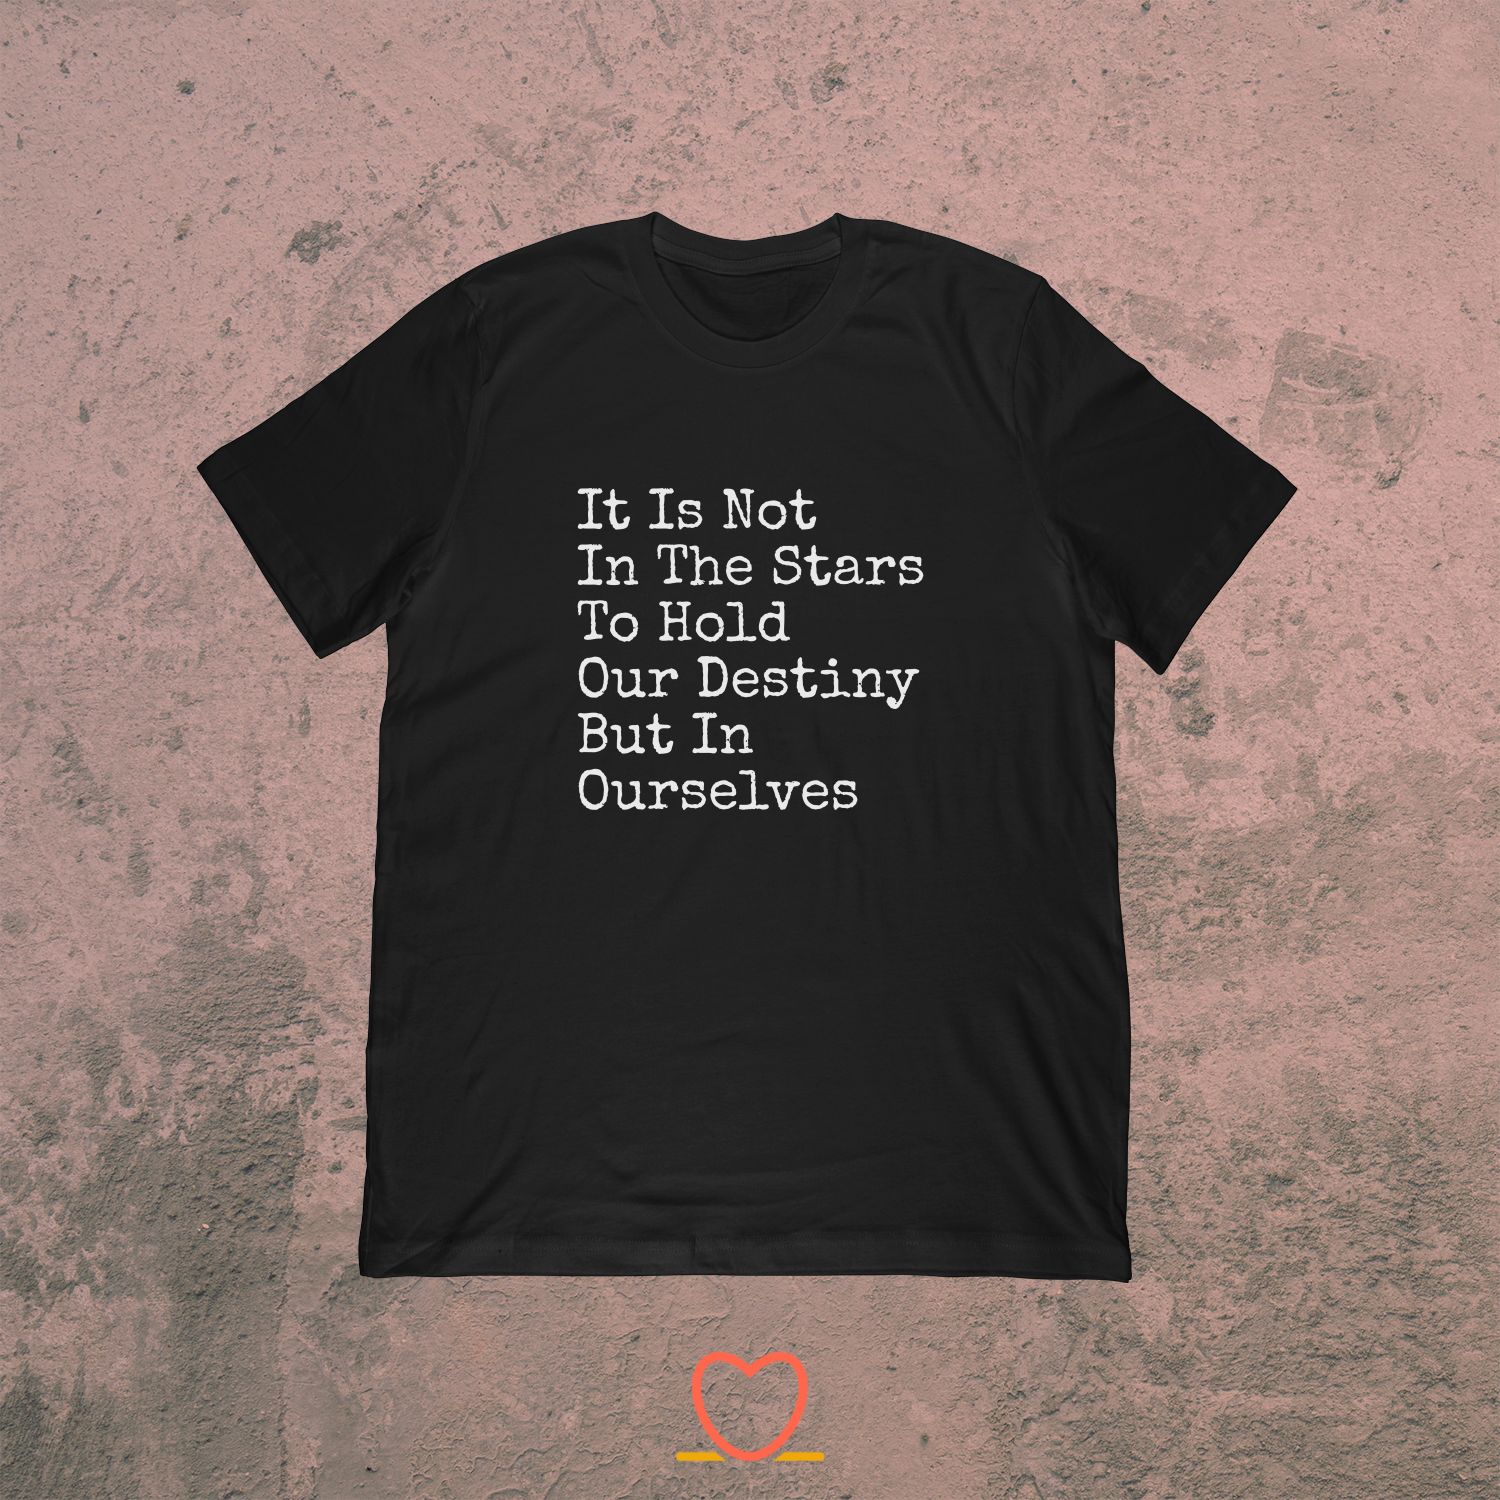 It’s Not In The Stars To Hold Our Destiny – Shakespeare Tee